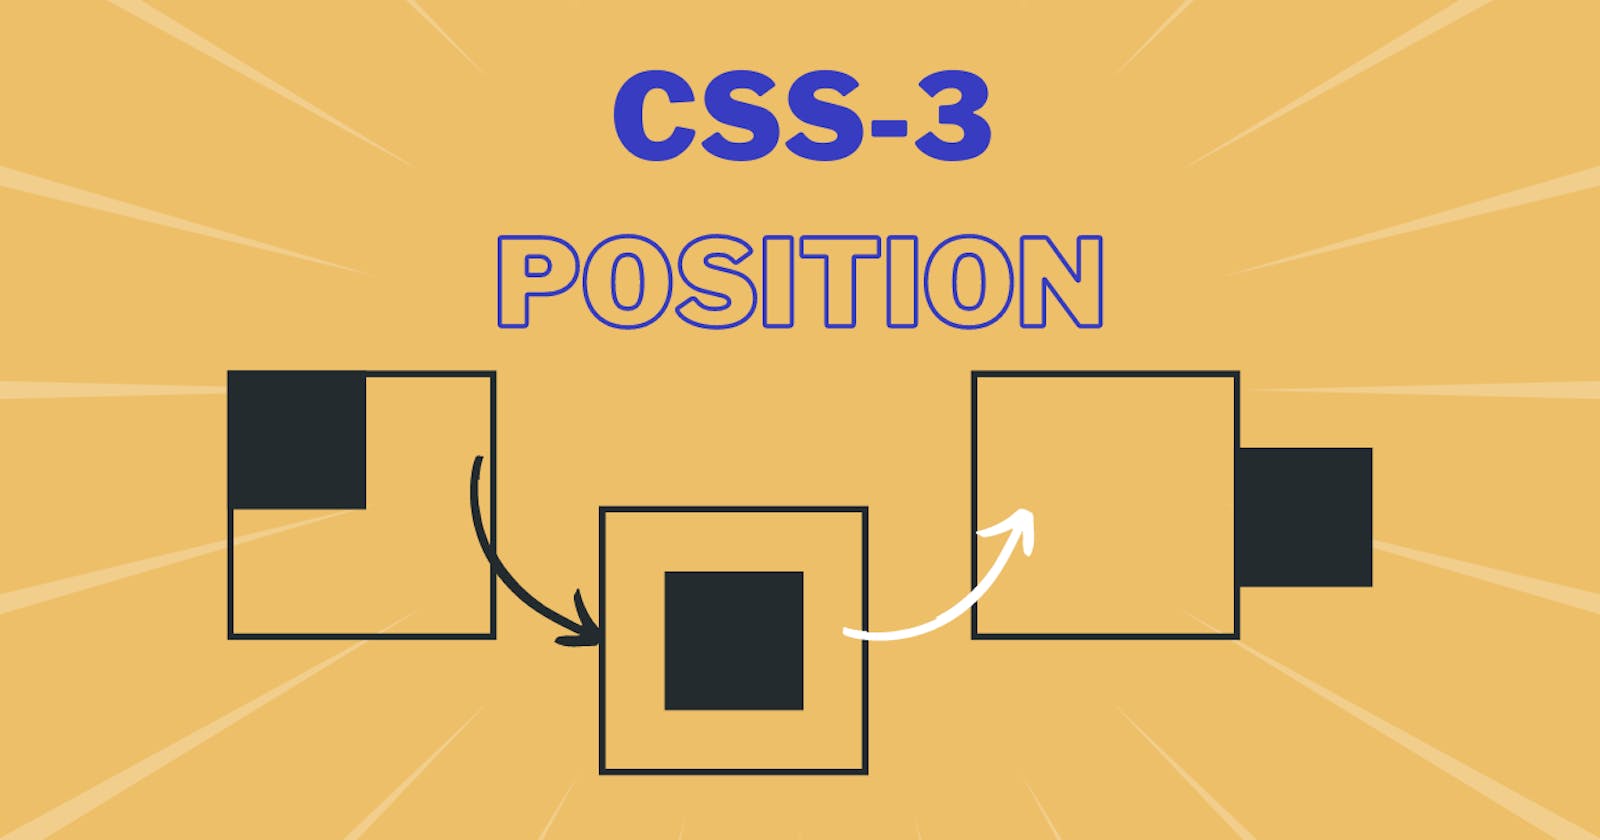 CSS-3 Position